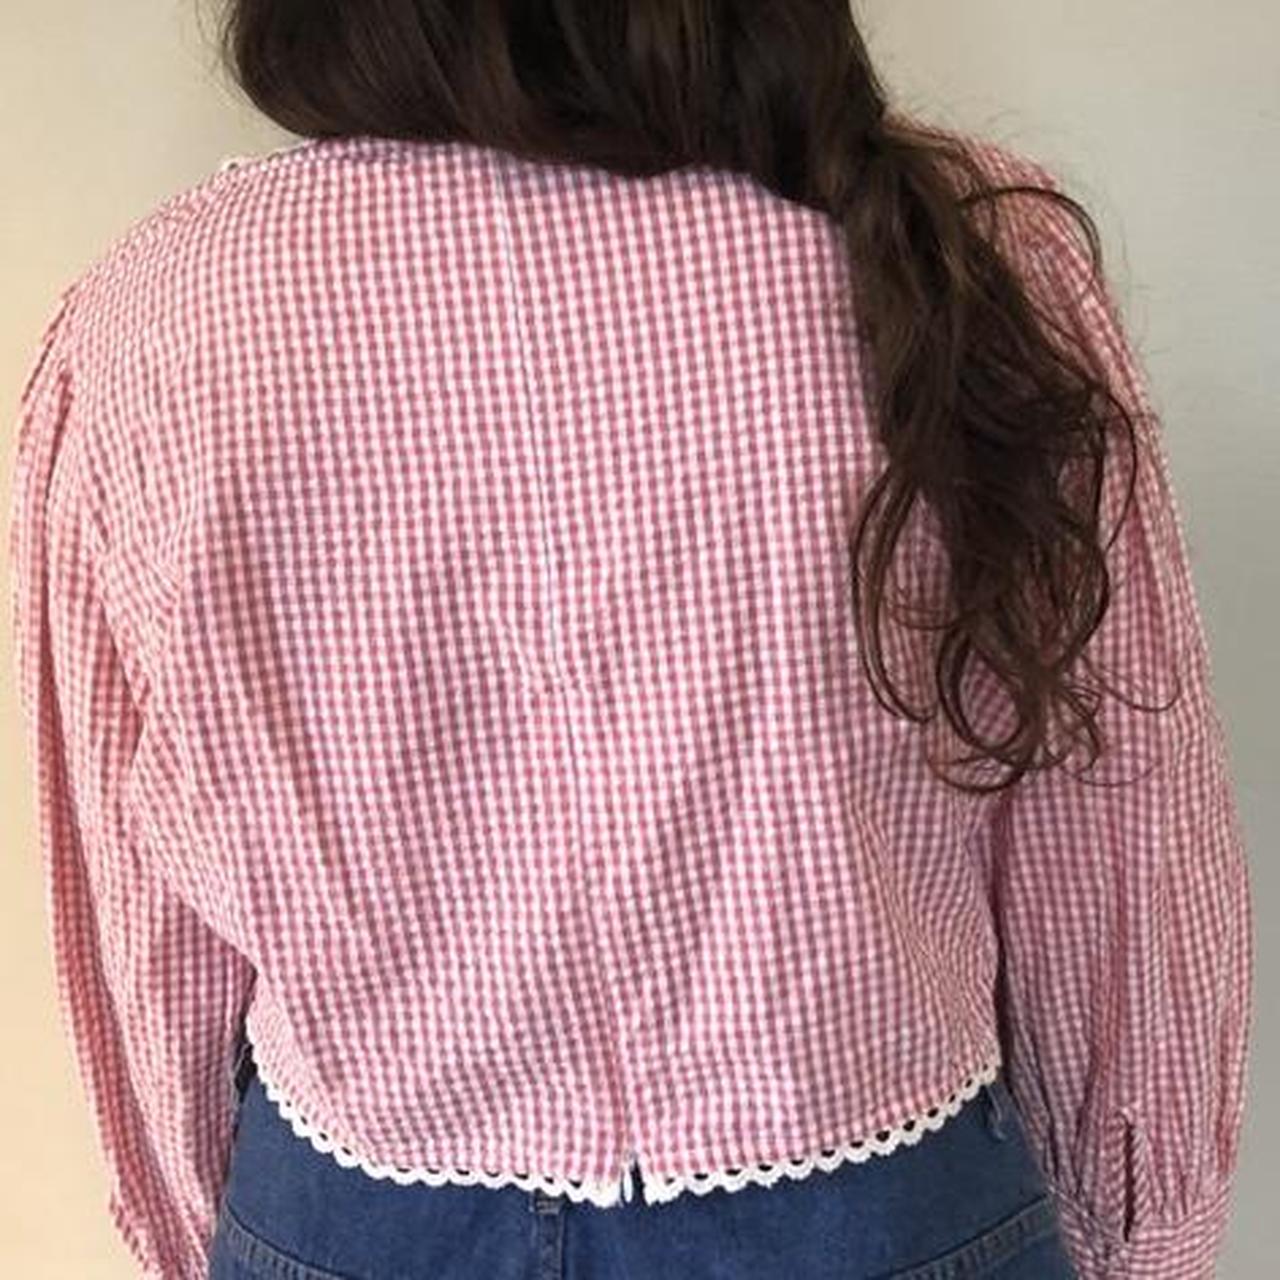 Women's White and Red Blouse (3)